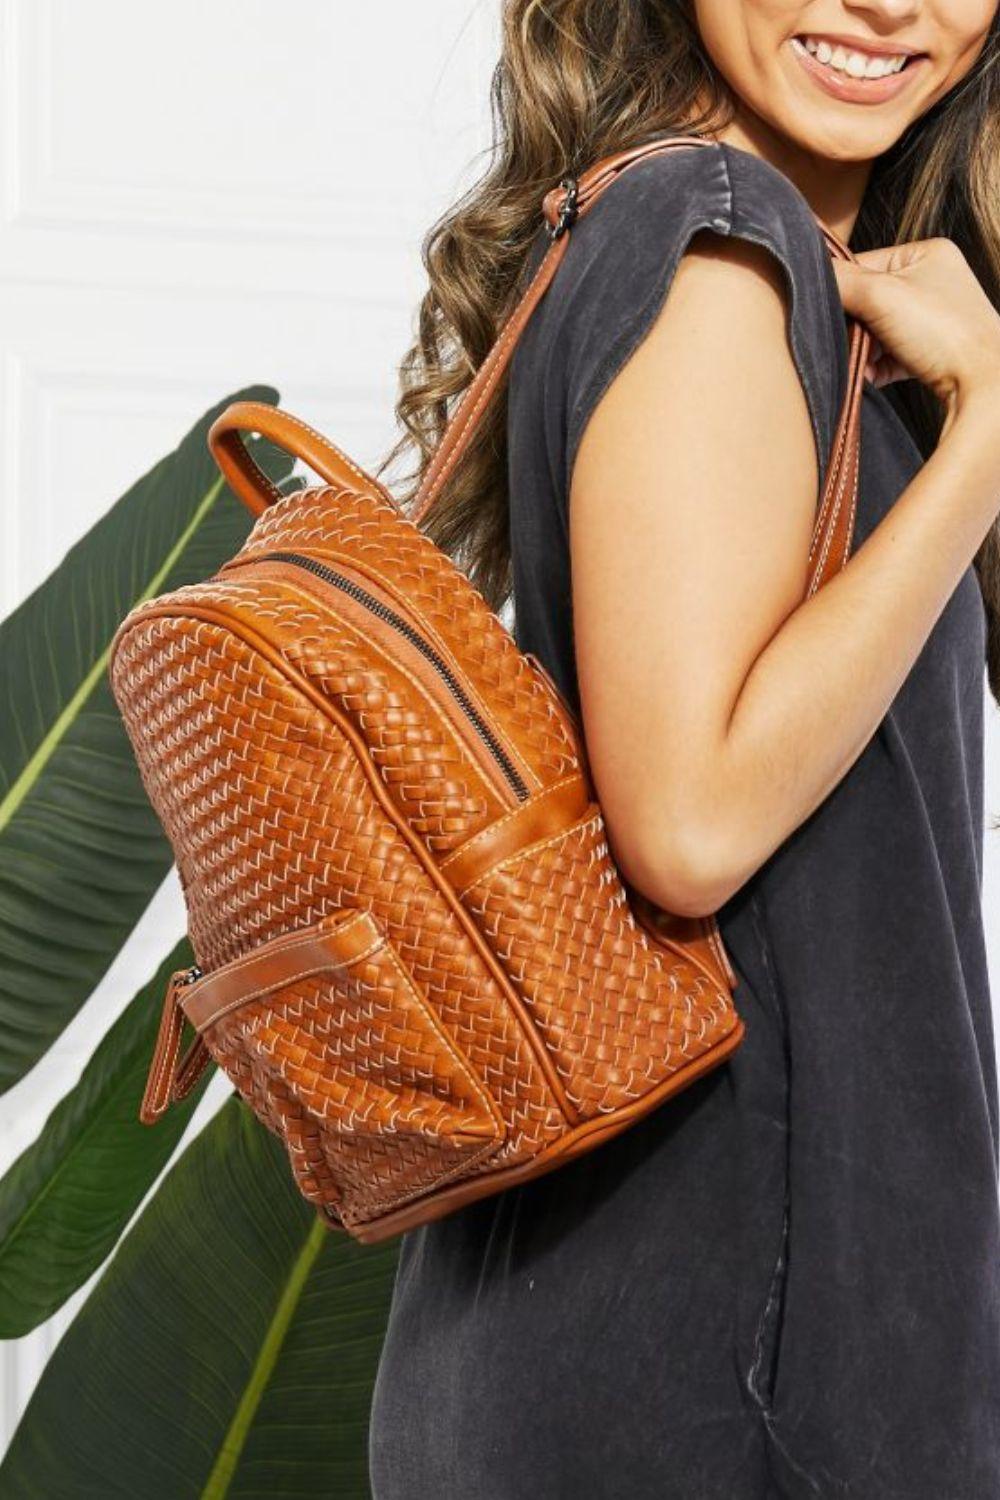 SHOMICO Certainly Chic Faux Leather Woven Backpack - Lab Fashion, Home & Health